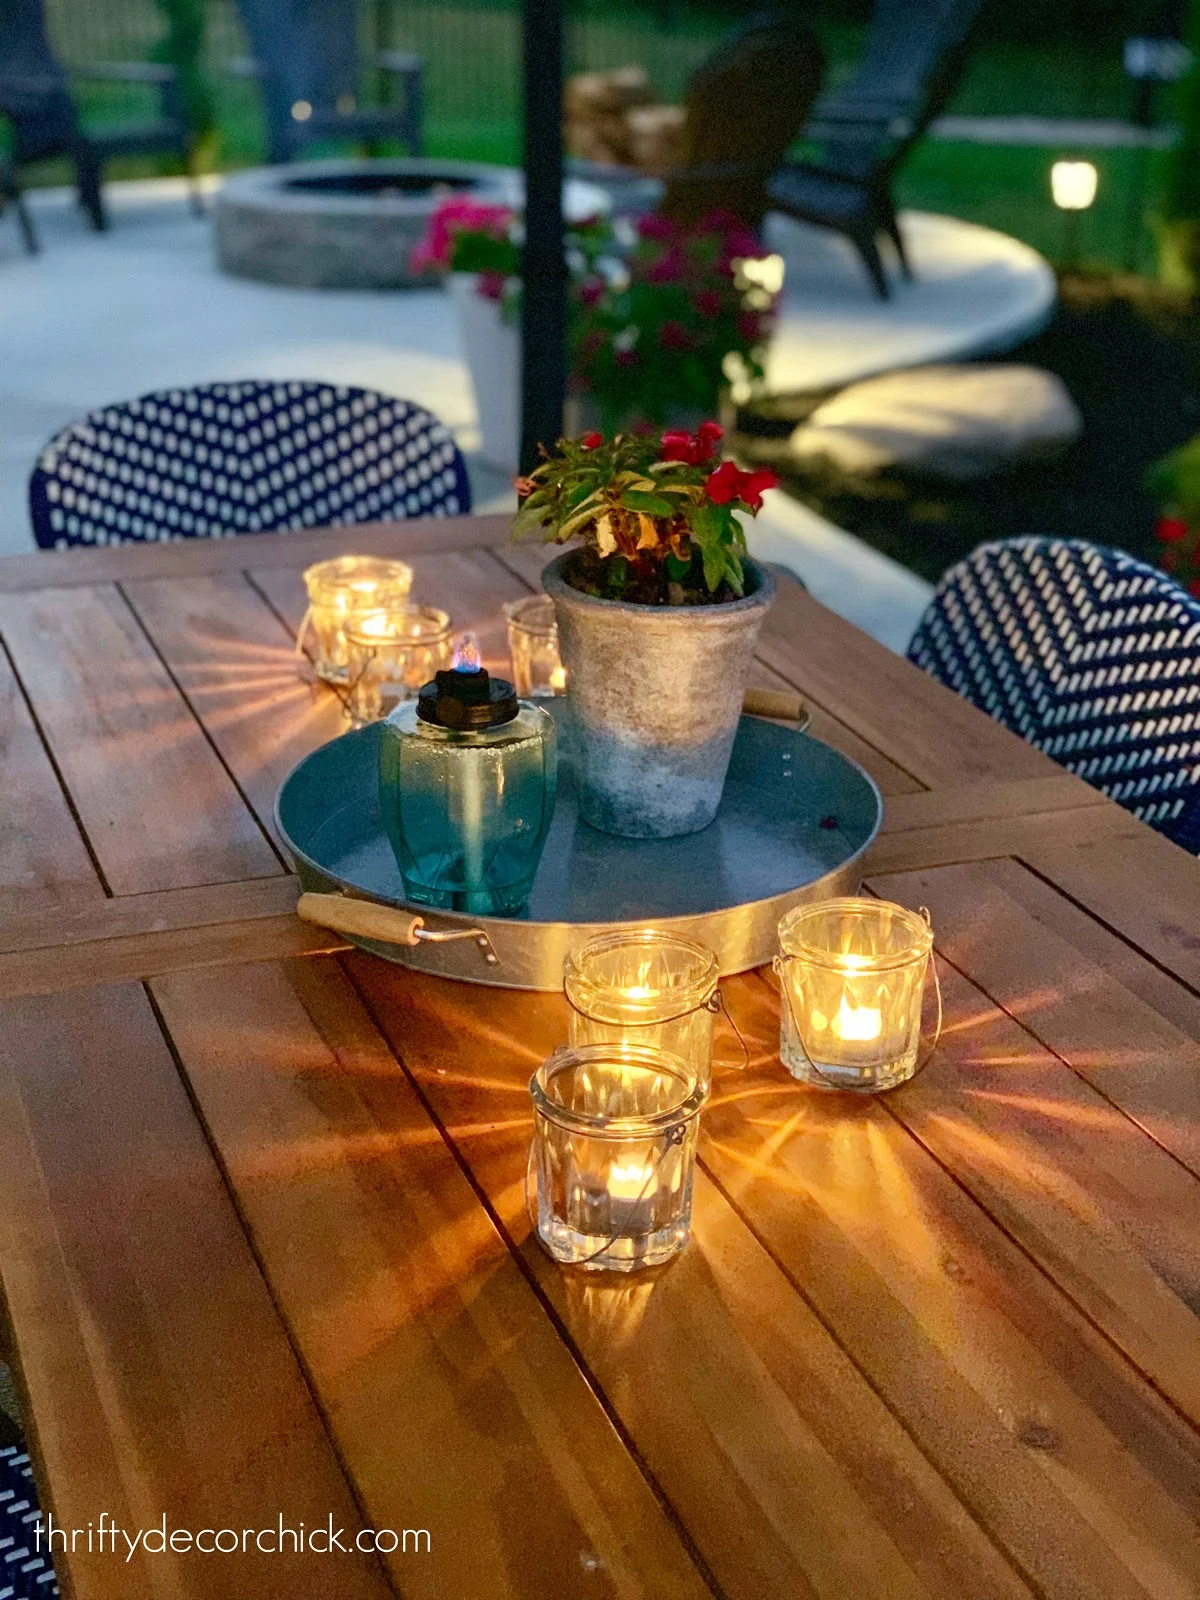 Thrifty Decor Chick patio reveal 